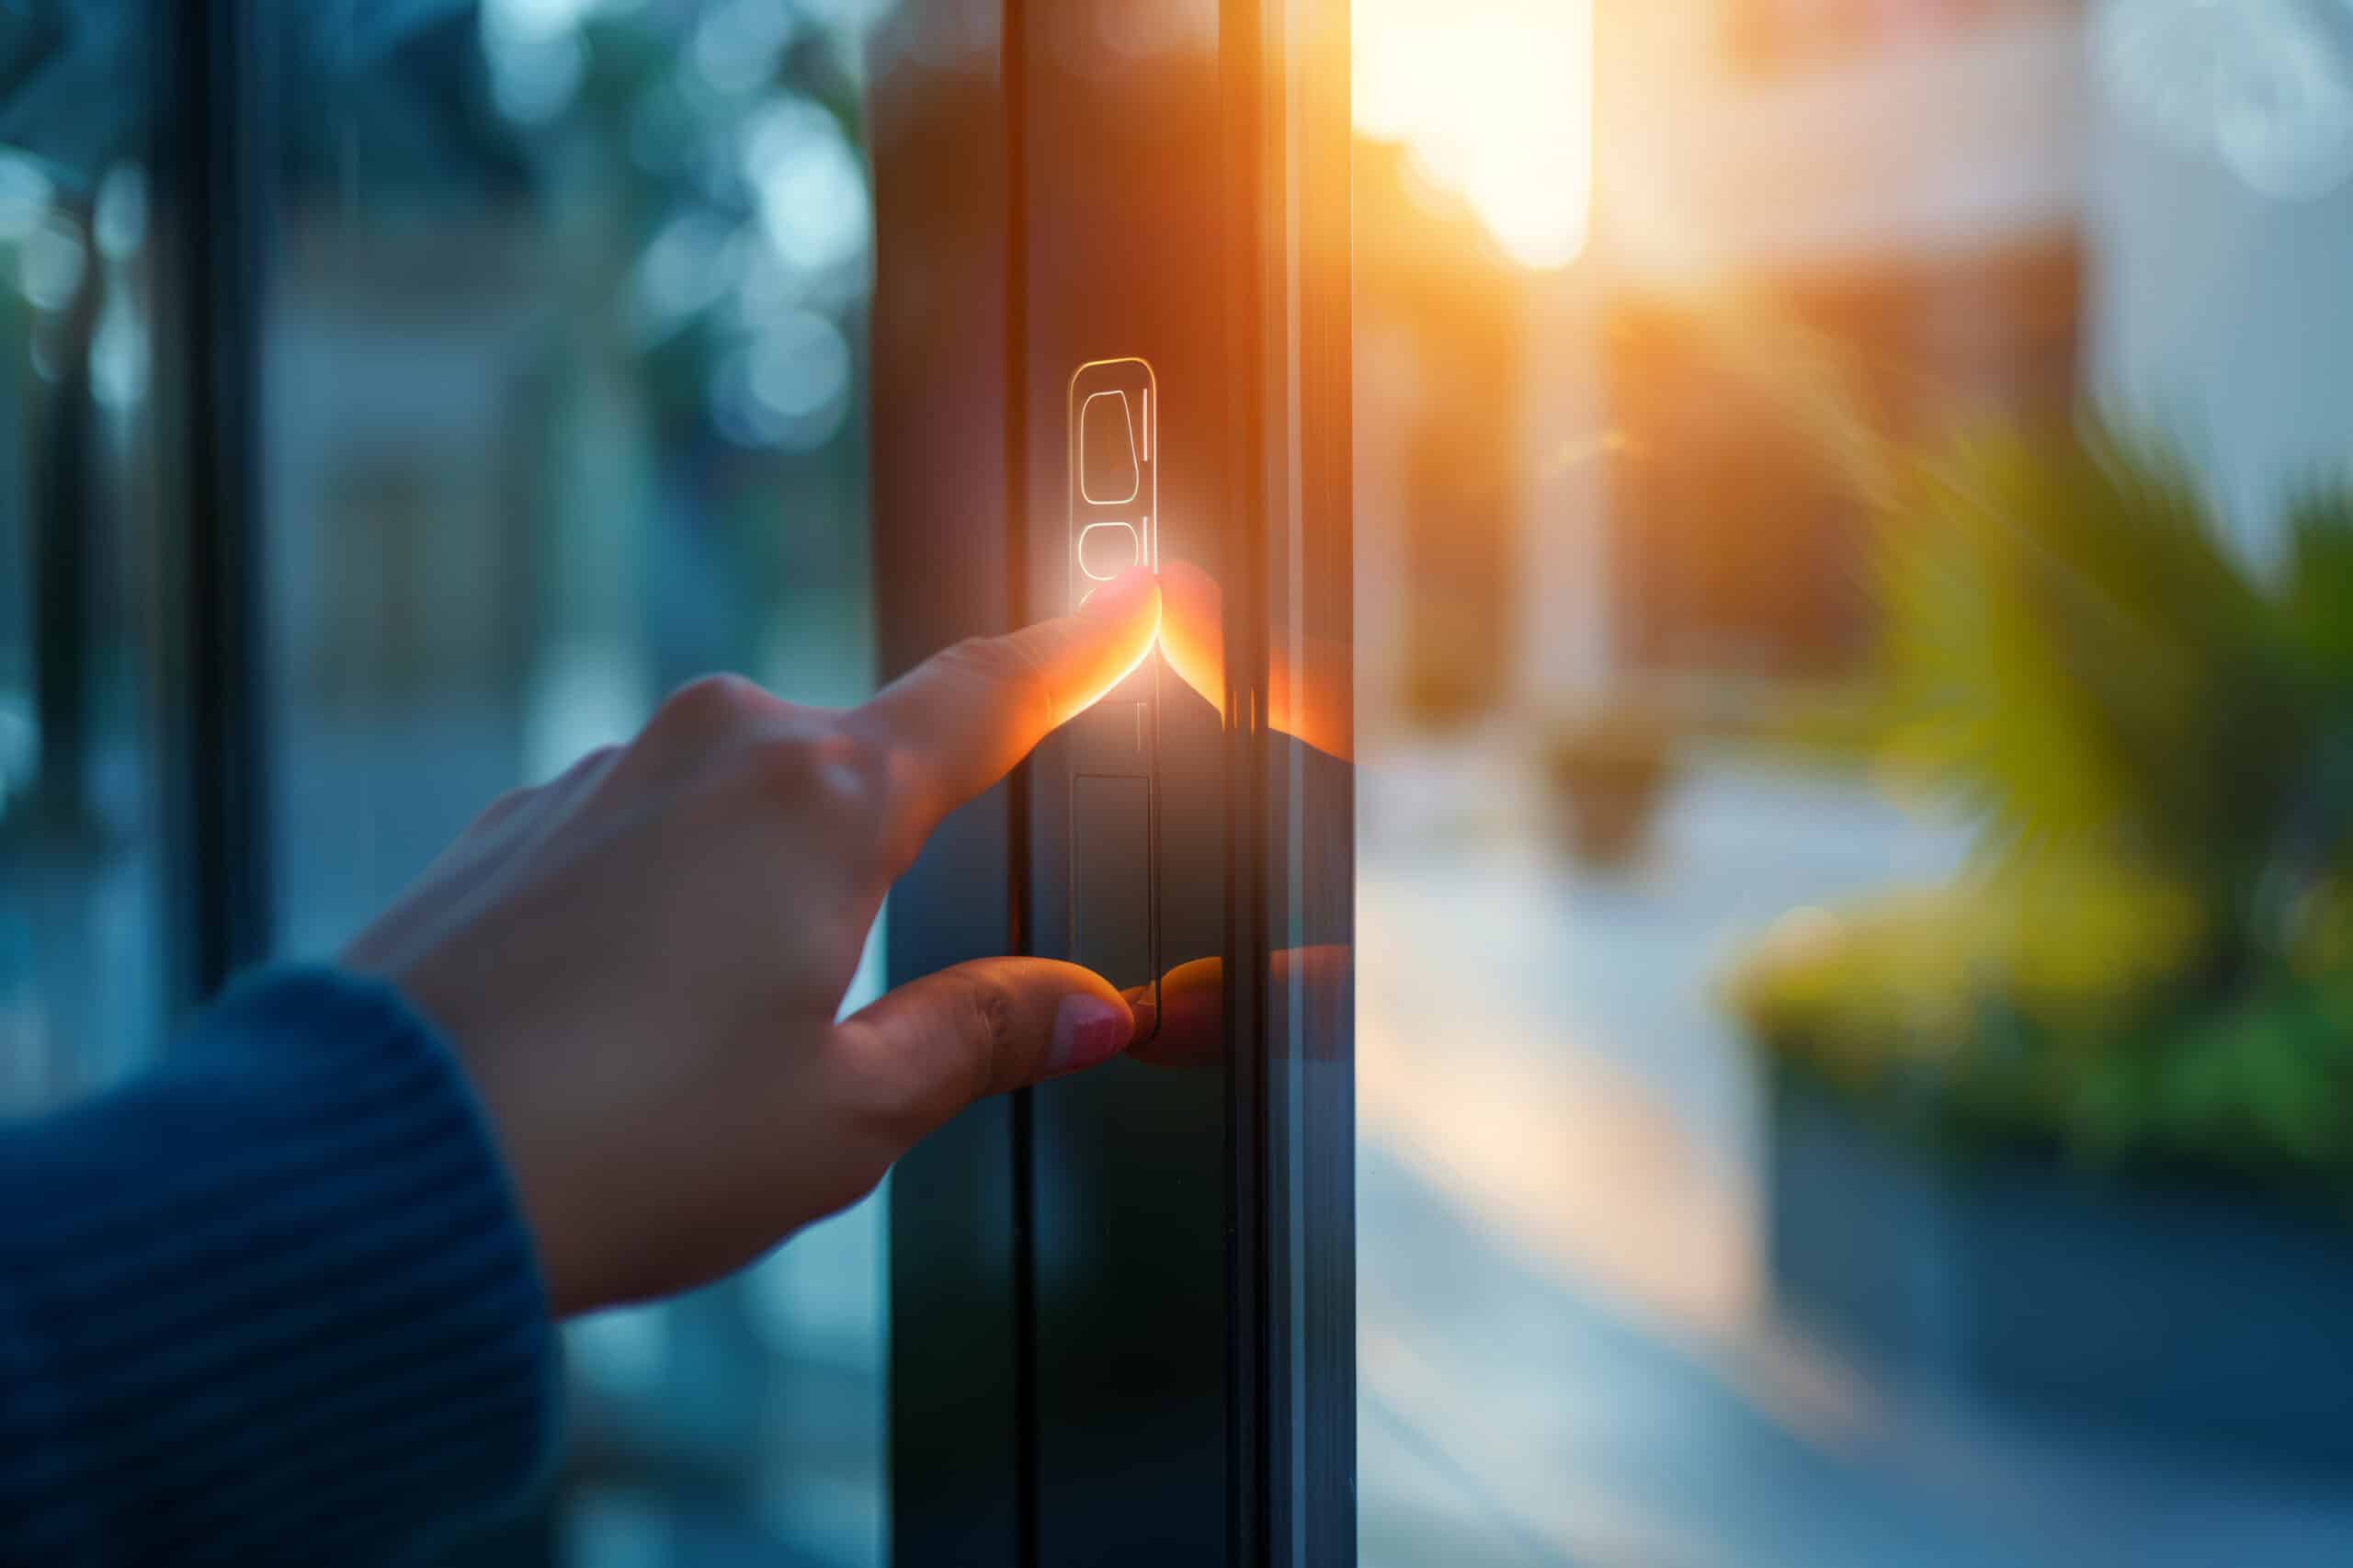 www.appr.com : What Features Does A Smart Doorbell Provide To A Householder?